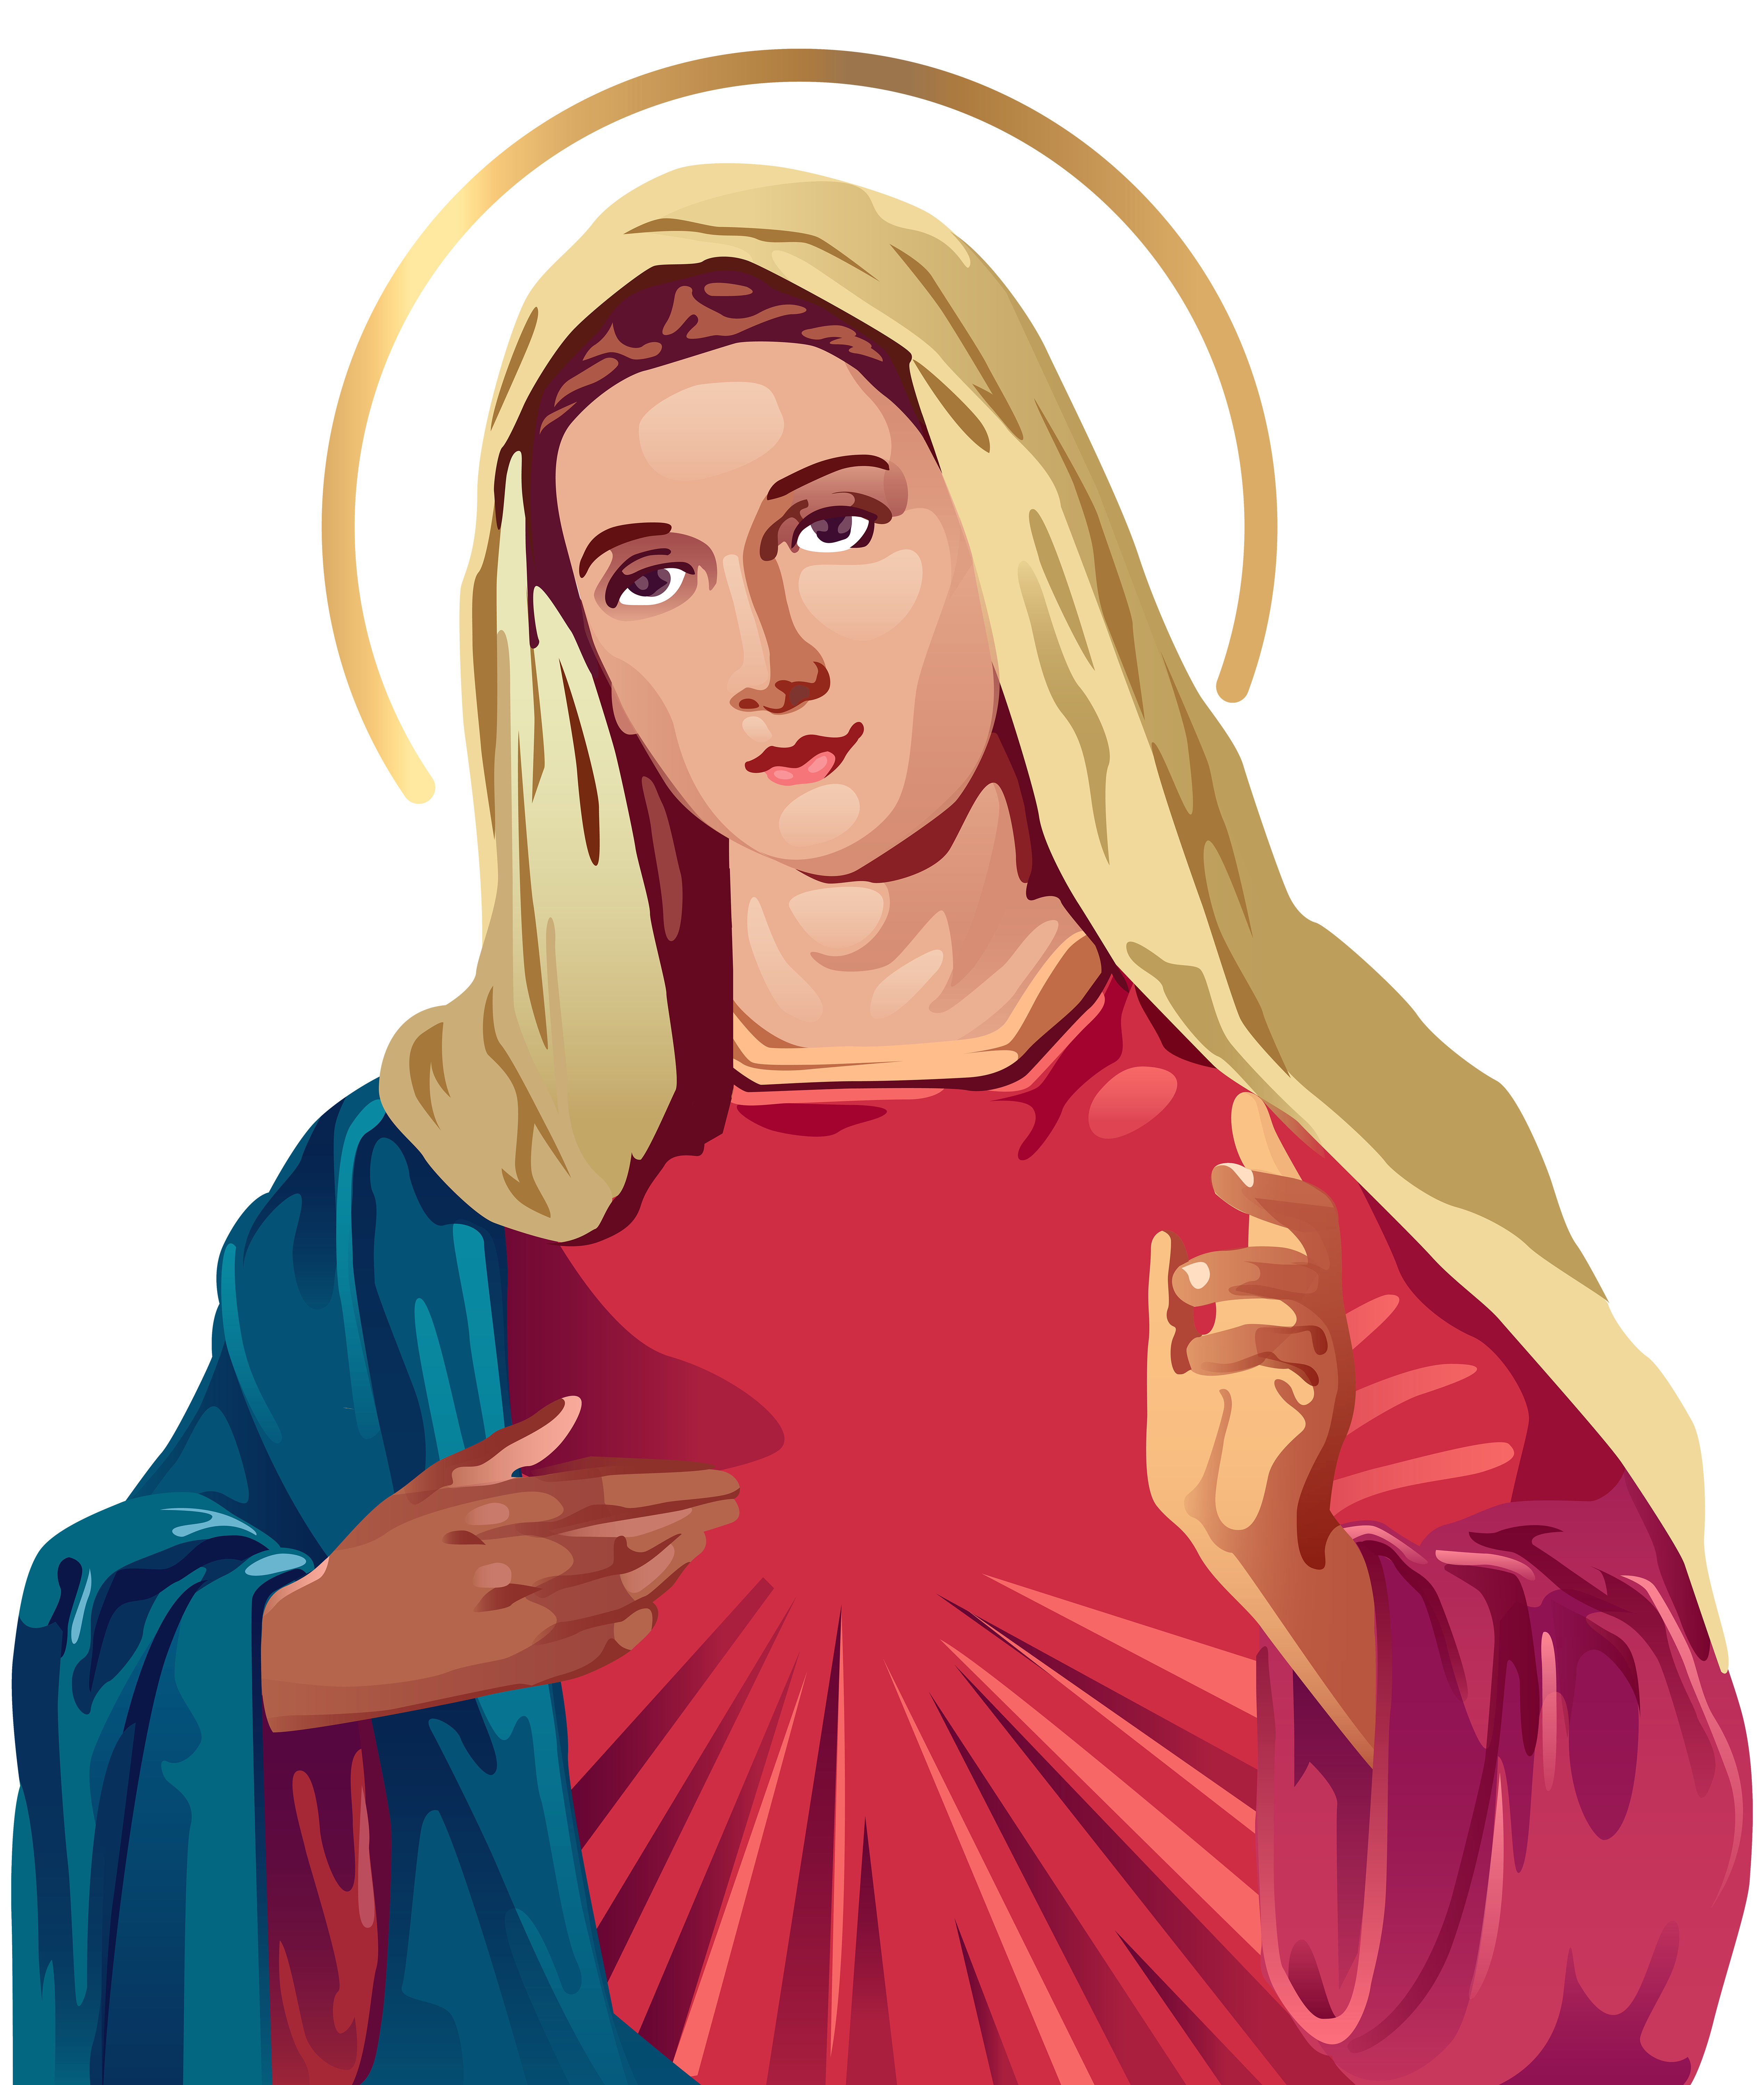 free clipart images virgin mary - photo #31